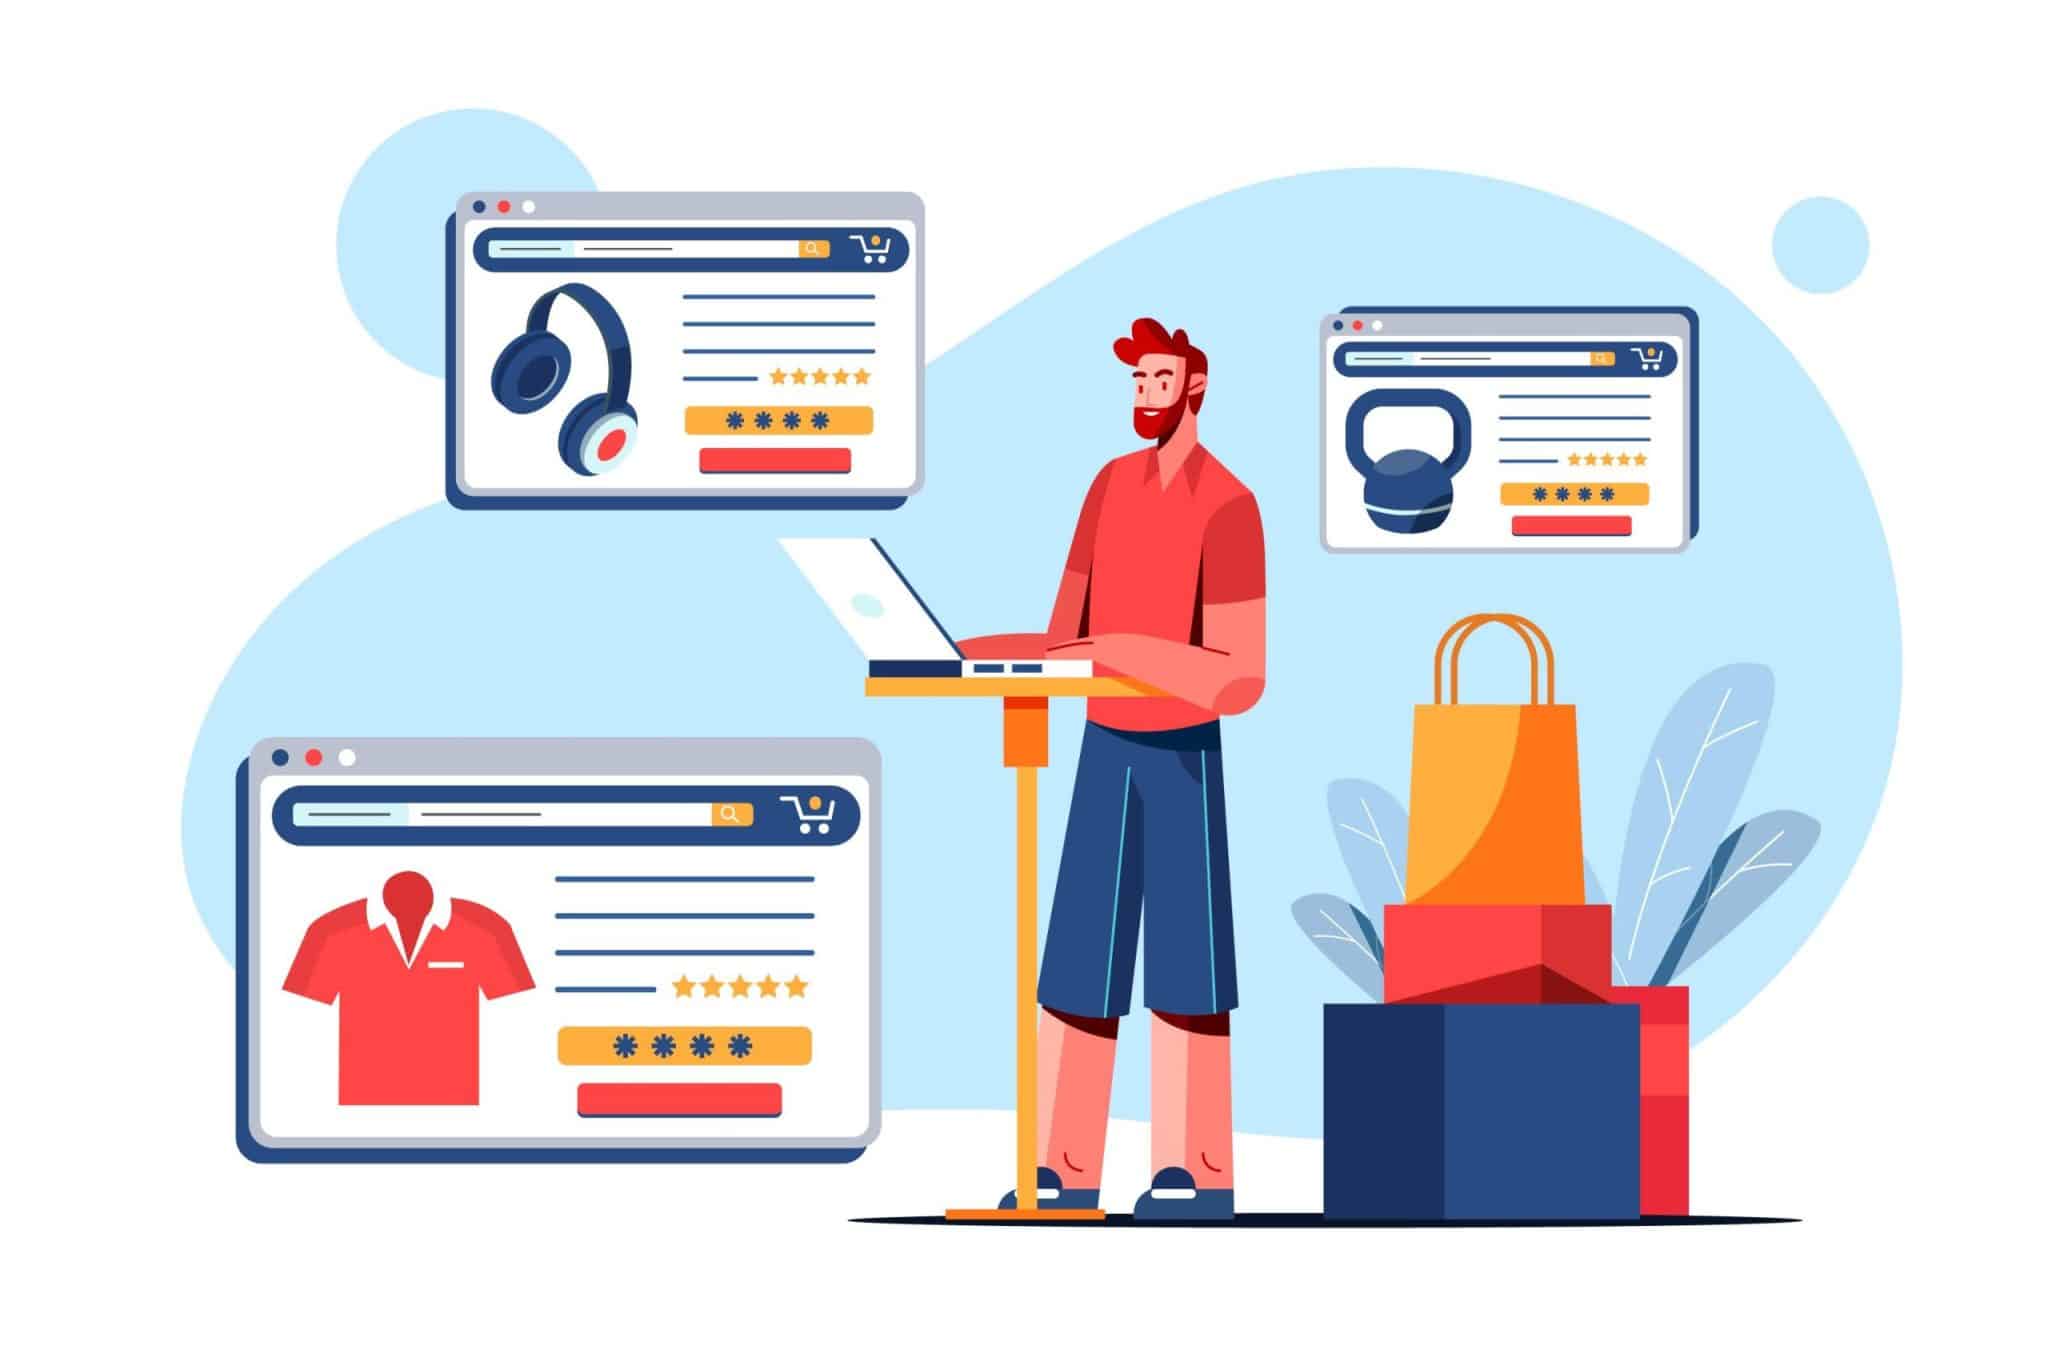 12 BigCommerce Features